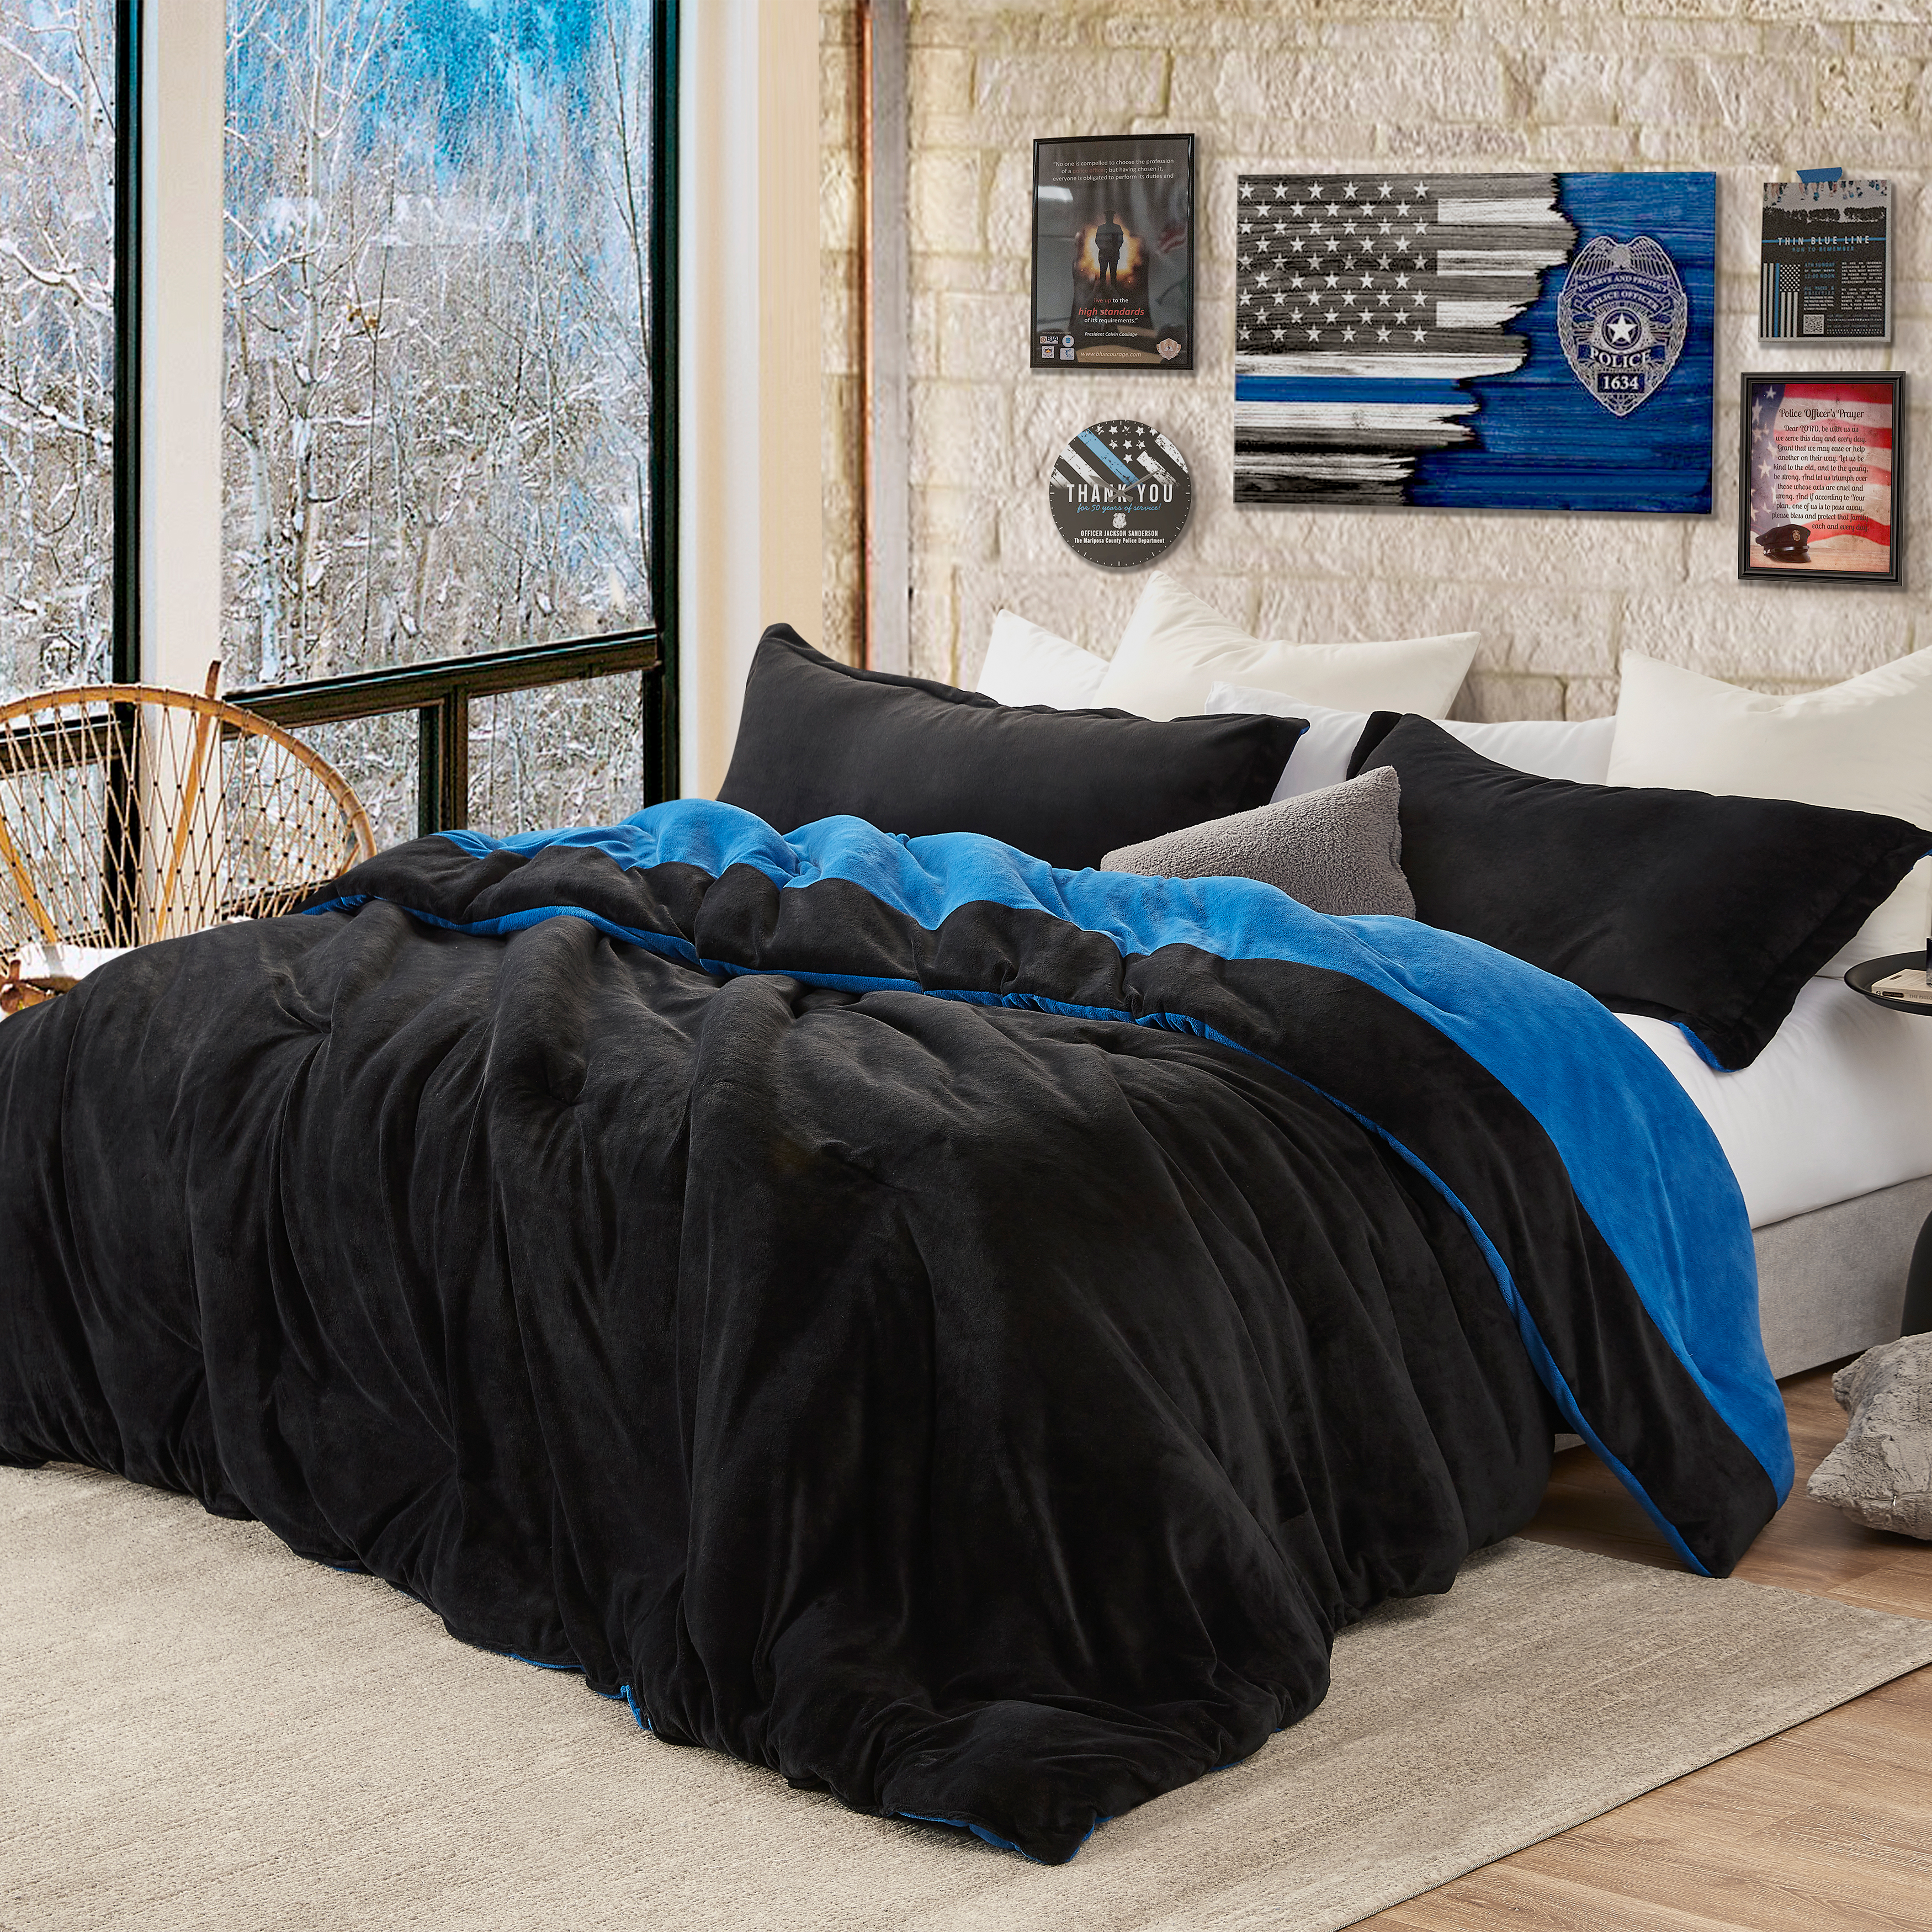 Even Heroes Need Sleep - Coma Inducer® Oversized King Comforter - Thickest Blue Line